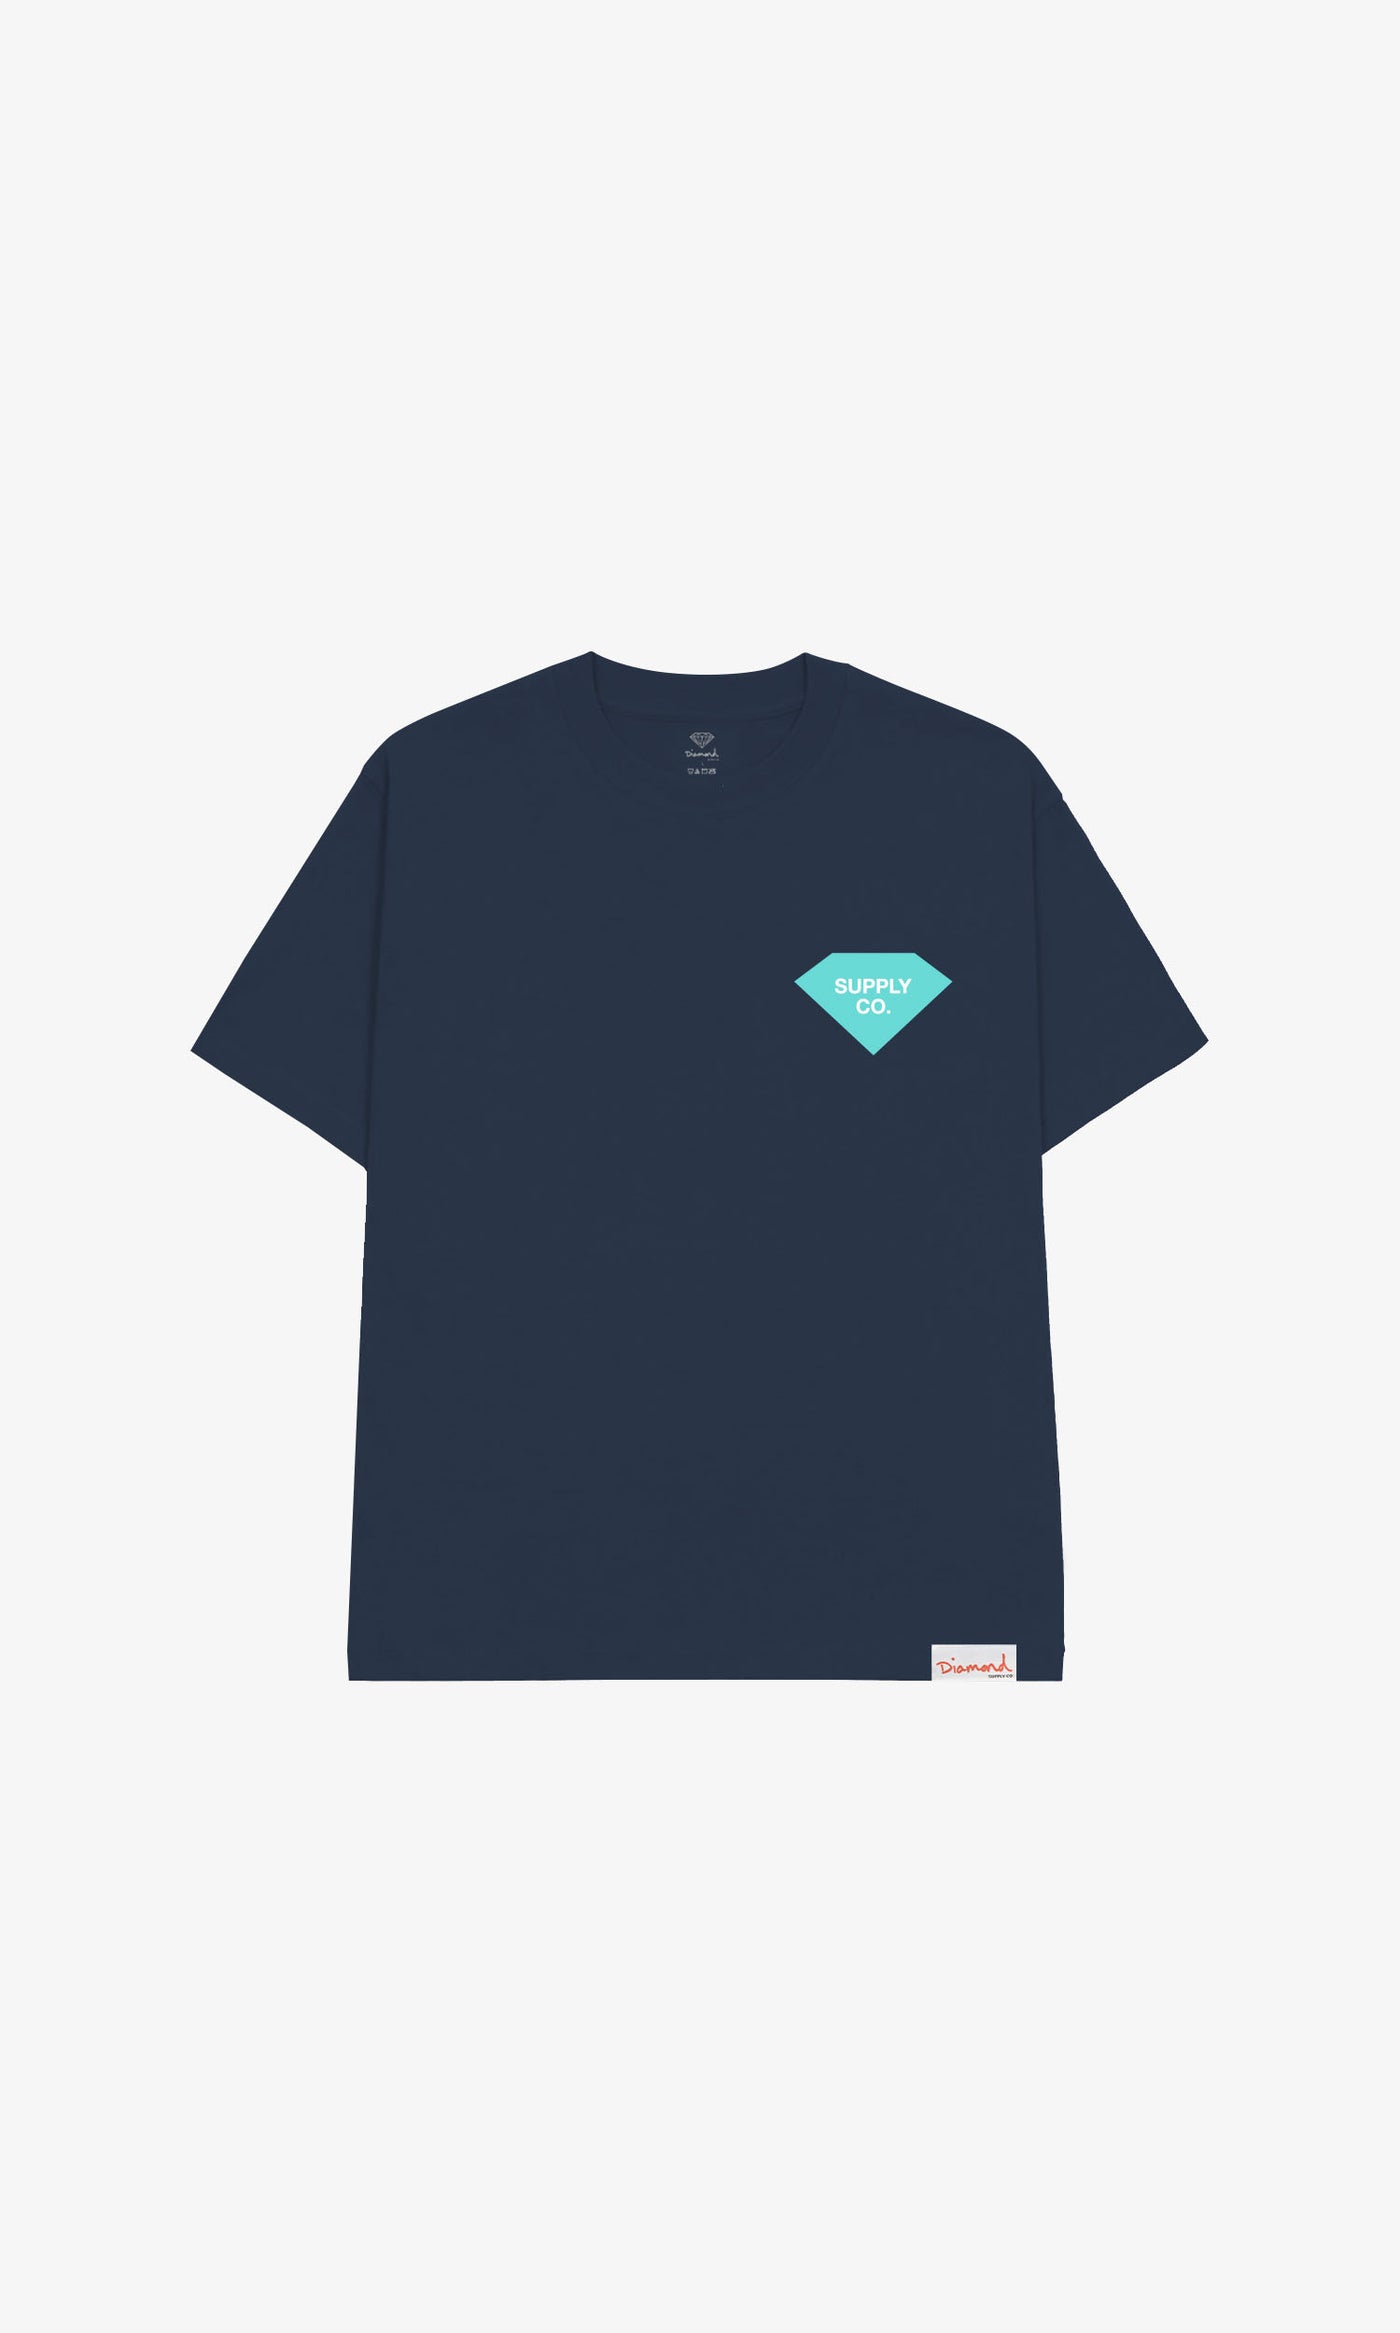 SILHOUETTE SUPPLY CO TEE - NAVY